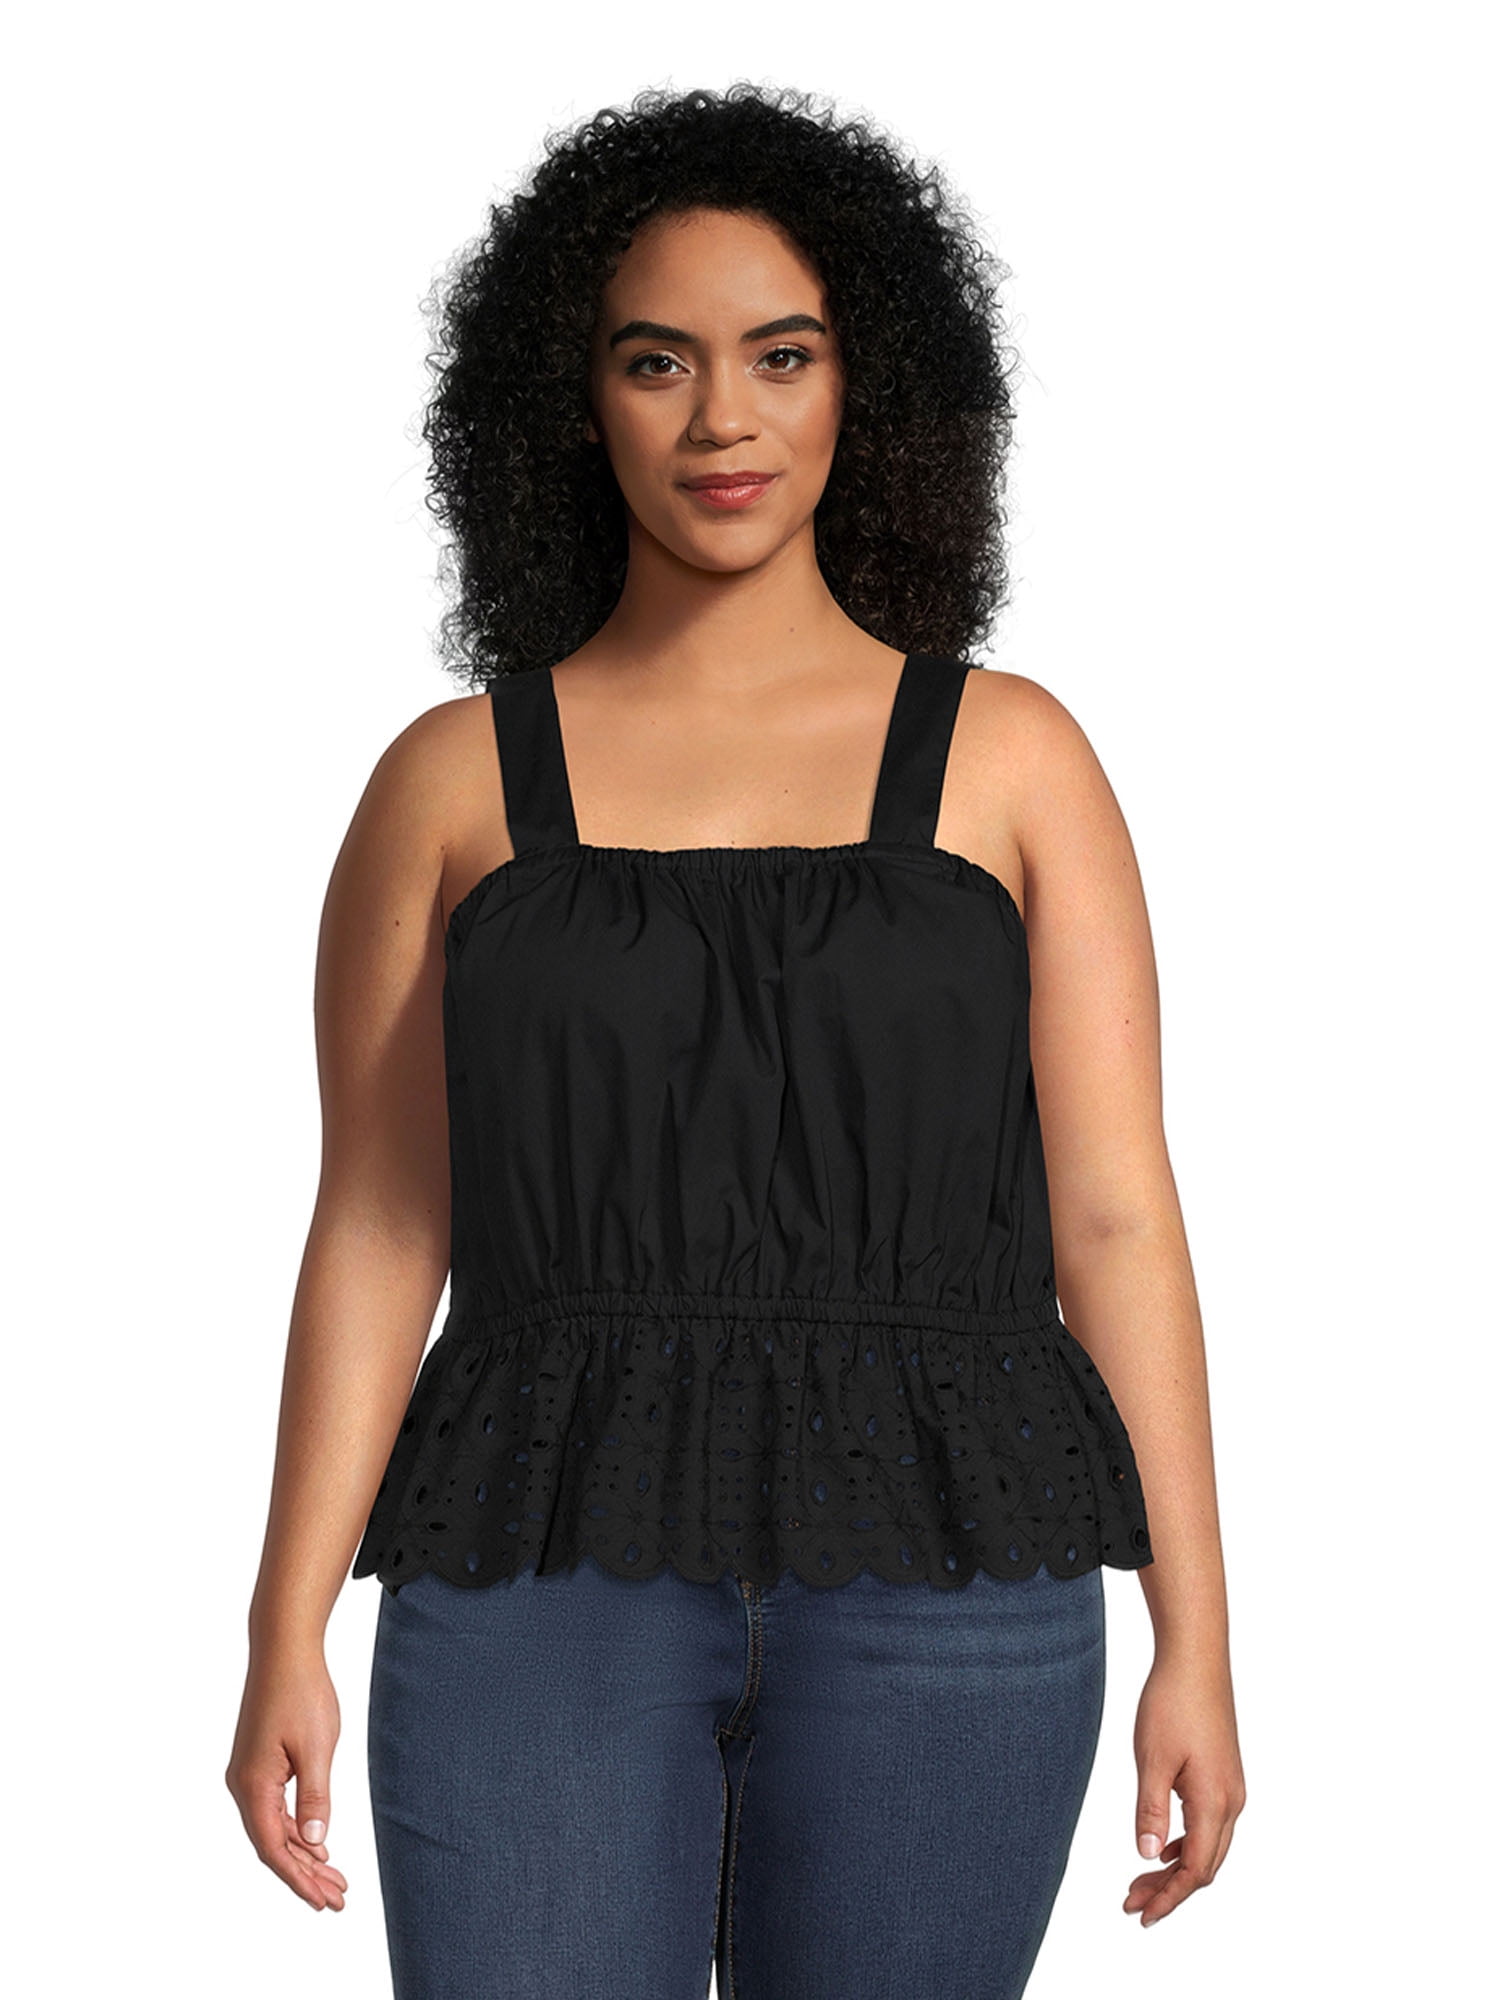 The Get Women’s Plus Size Ruched Eyelet Tank Top